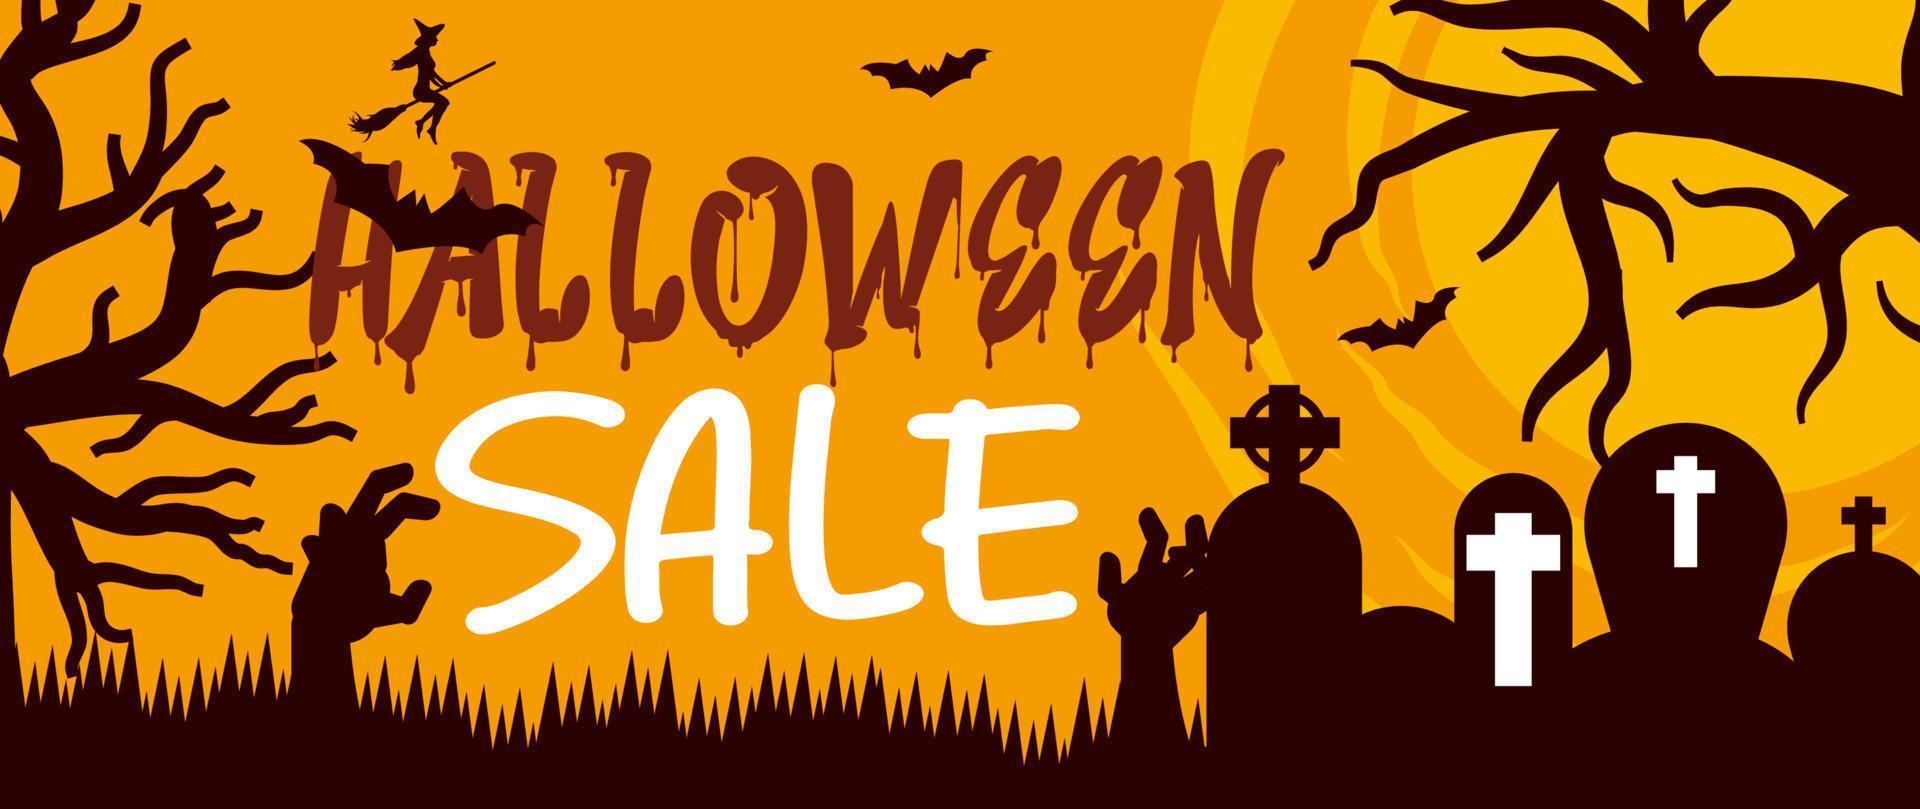 Halloween Horizontal Sale off Banner. Email marketing web banner. Black background banner with Spider, spider web, pumpkin. Typography and calligraphy of Halloween. Black border illustration. vector